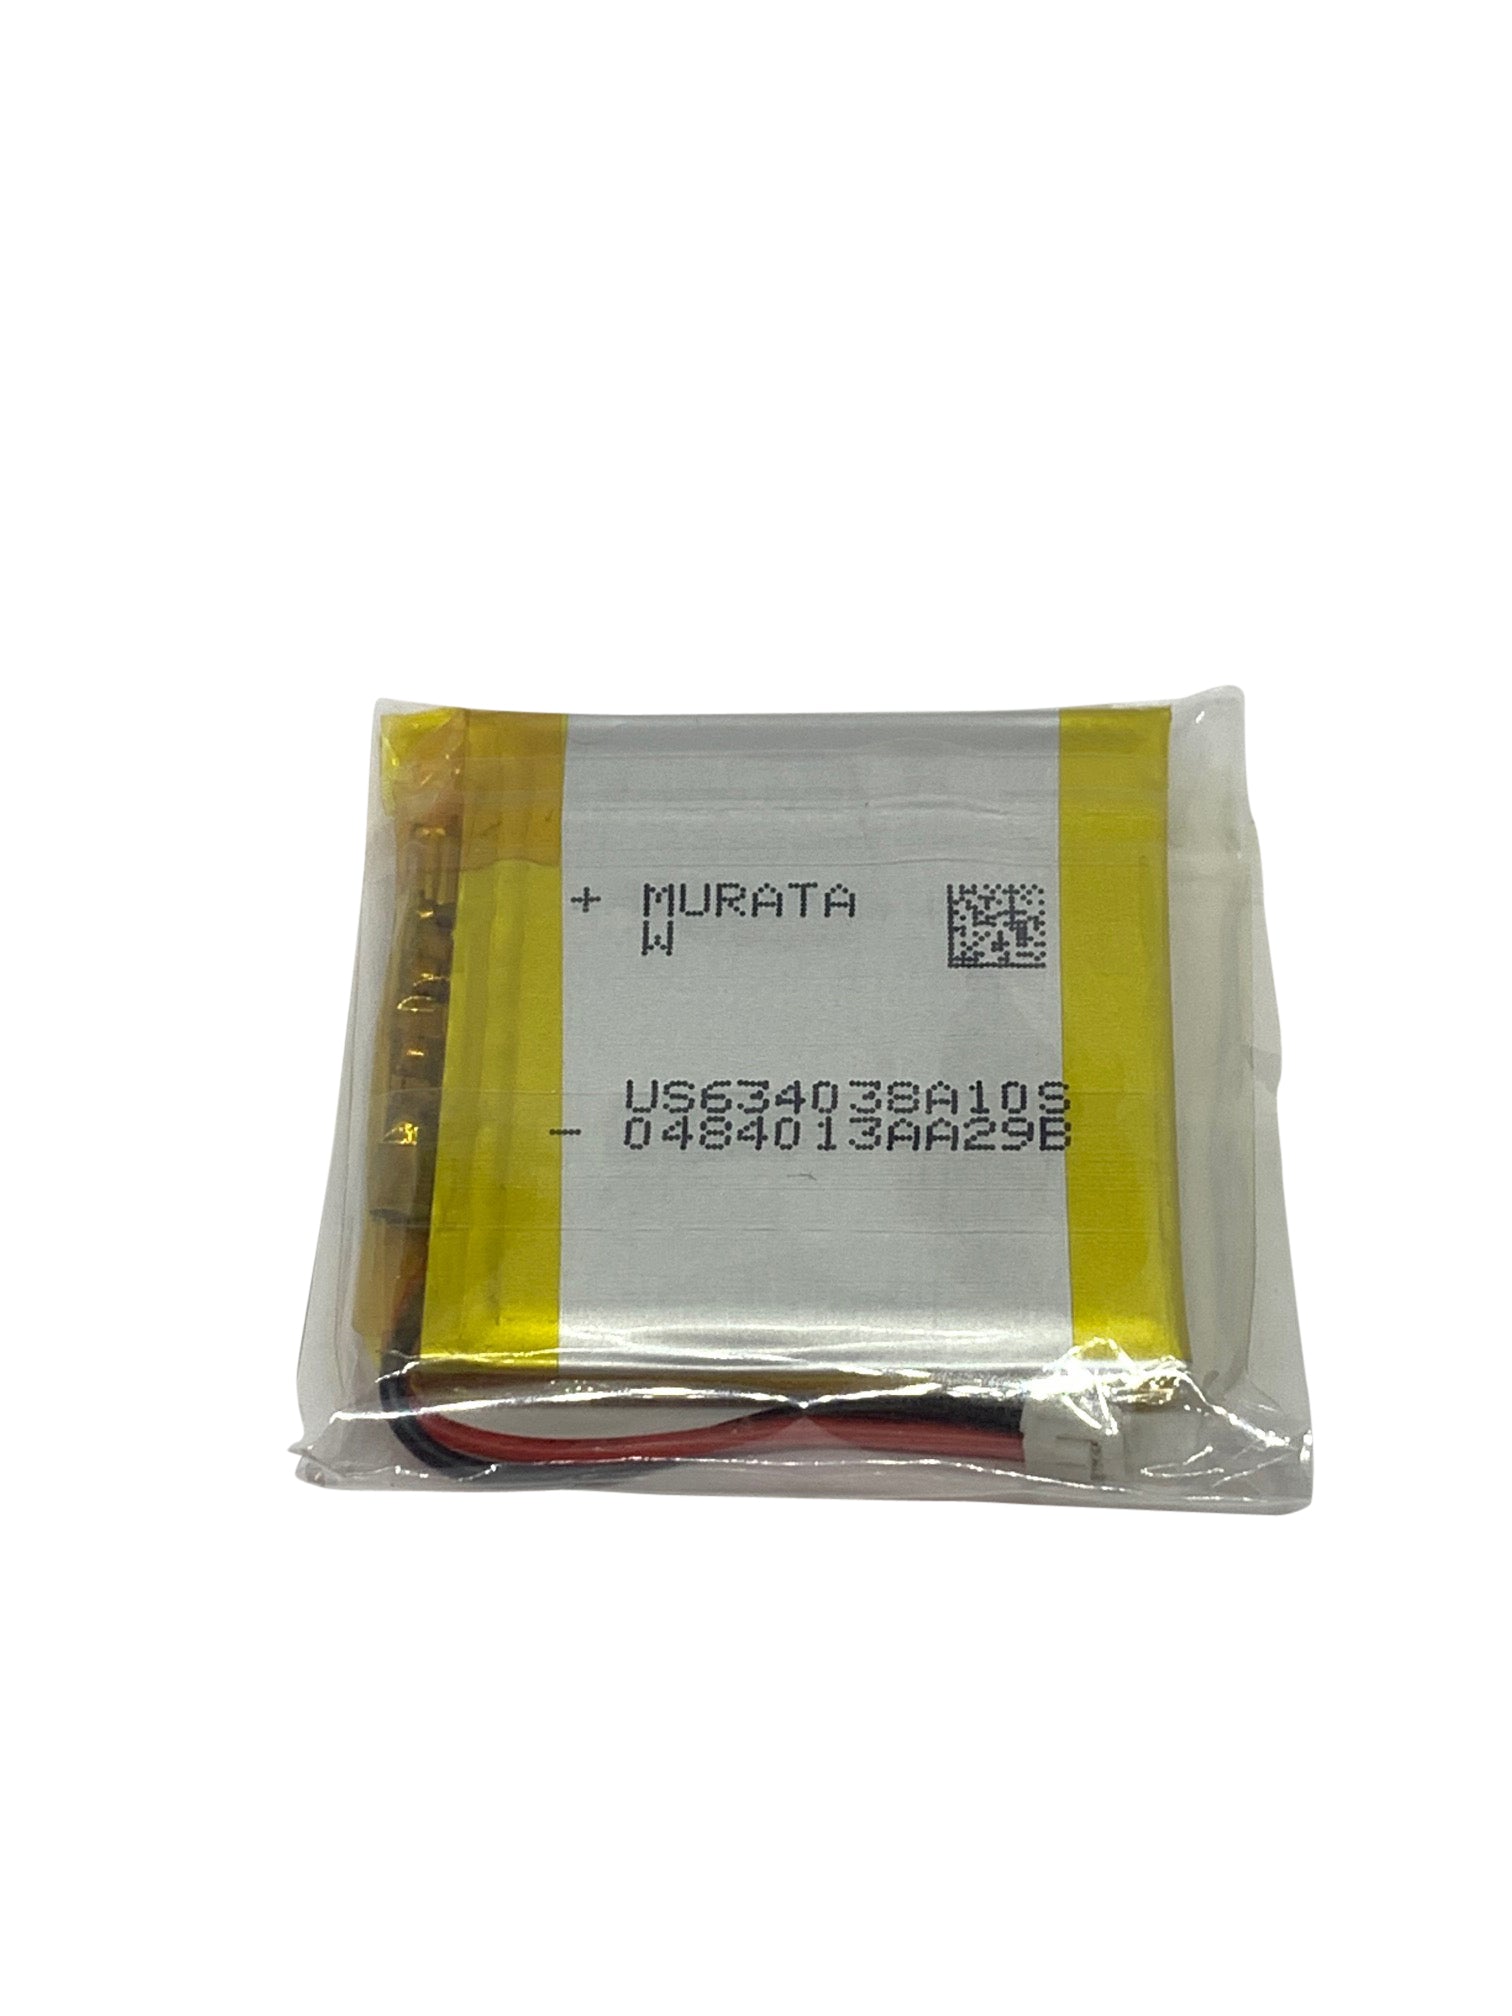 Sony WH-1000XM3 Wireless Headphones Replacement Li-Ion Battery Part 3.7V 1000mAh - CentralSound